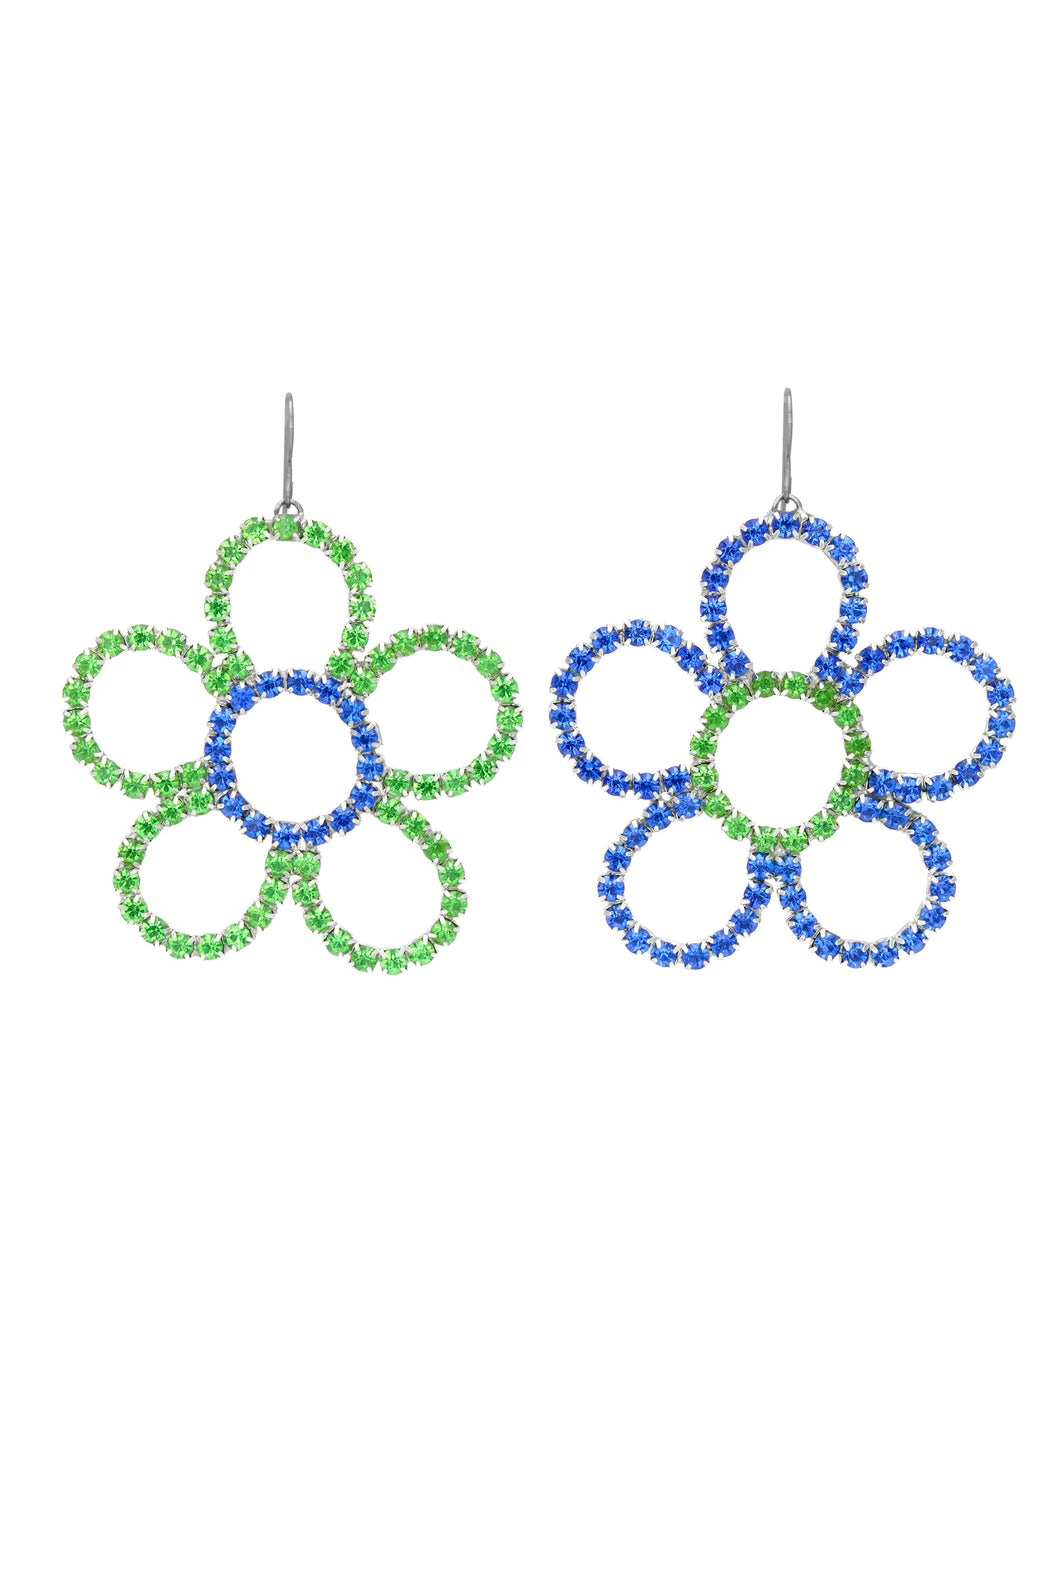 Glam Daisy Mismatched Earrings | Blue and Green